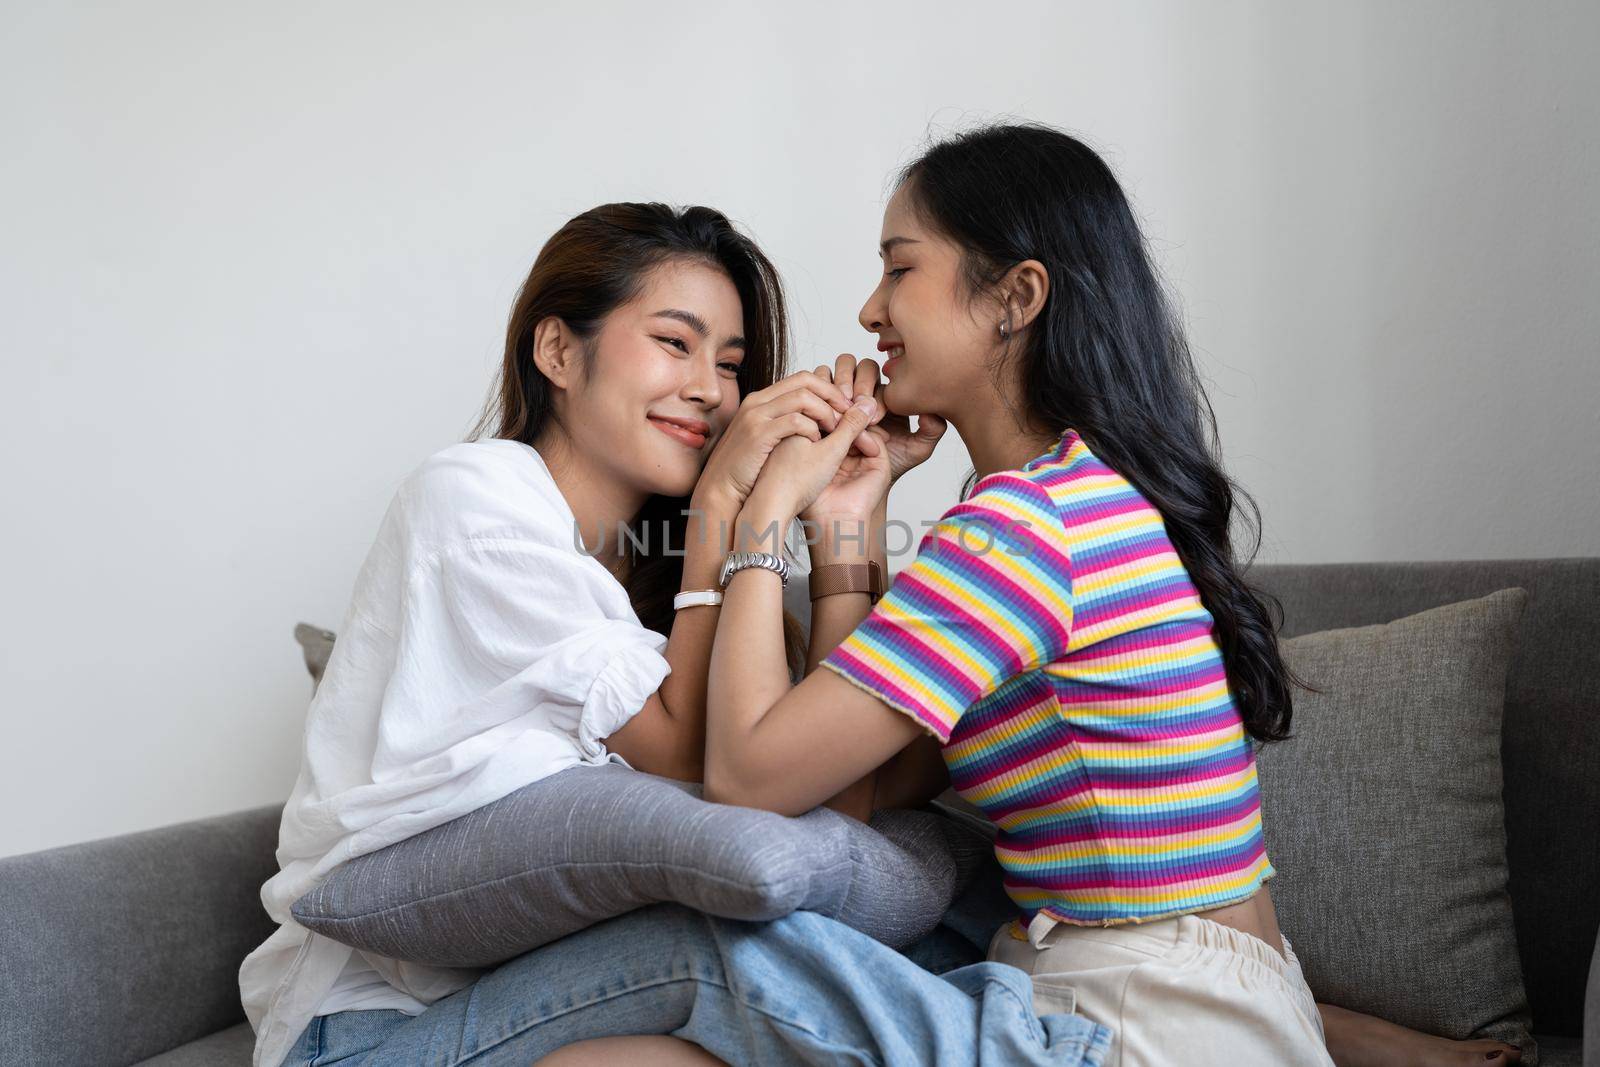 Happy lesbian, pleasure asian young two women, girl gay or close friend, couple love moment spending good time together on sofa at home. Activity of leisure, relax